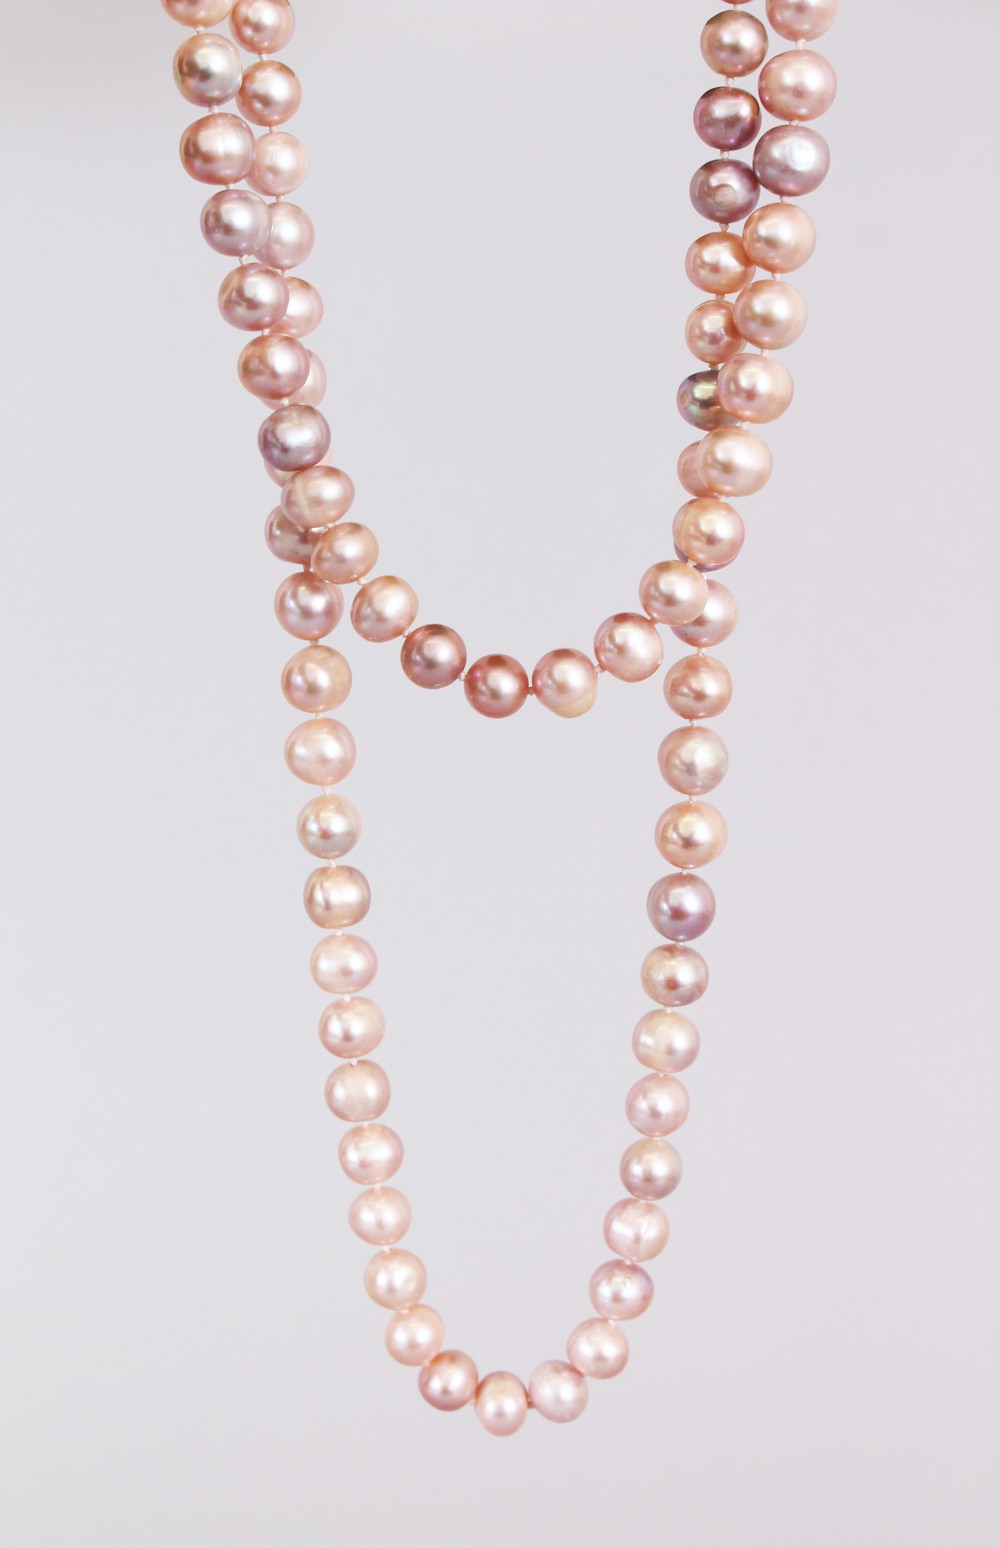 A LONG STRING OF PINK PEARLS. - Image 2 of 2